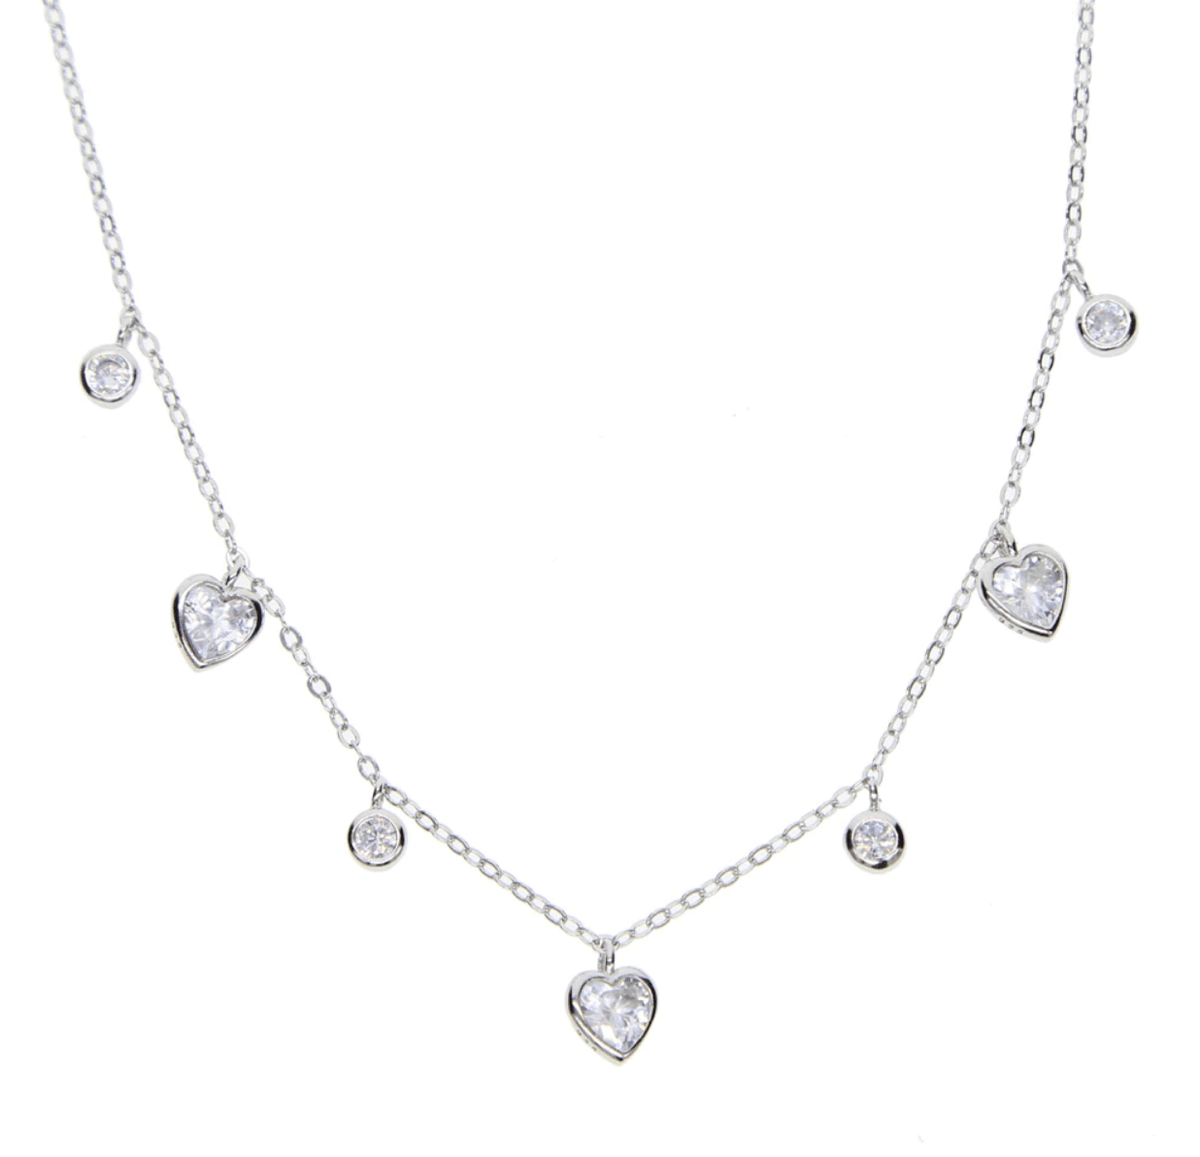 Silver Heart Charm NEcklace WIth Diamonds